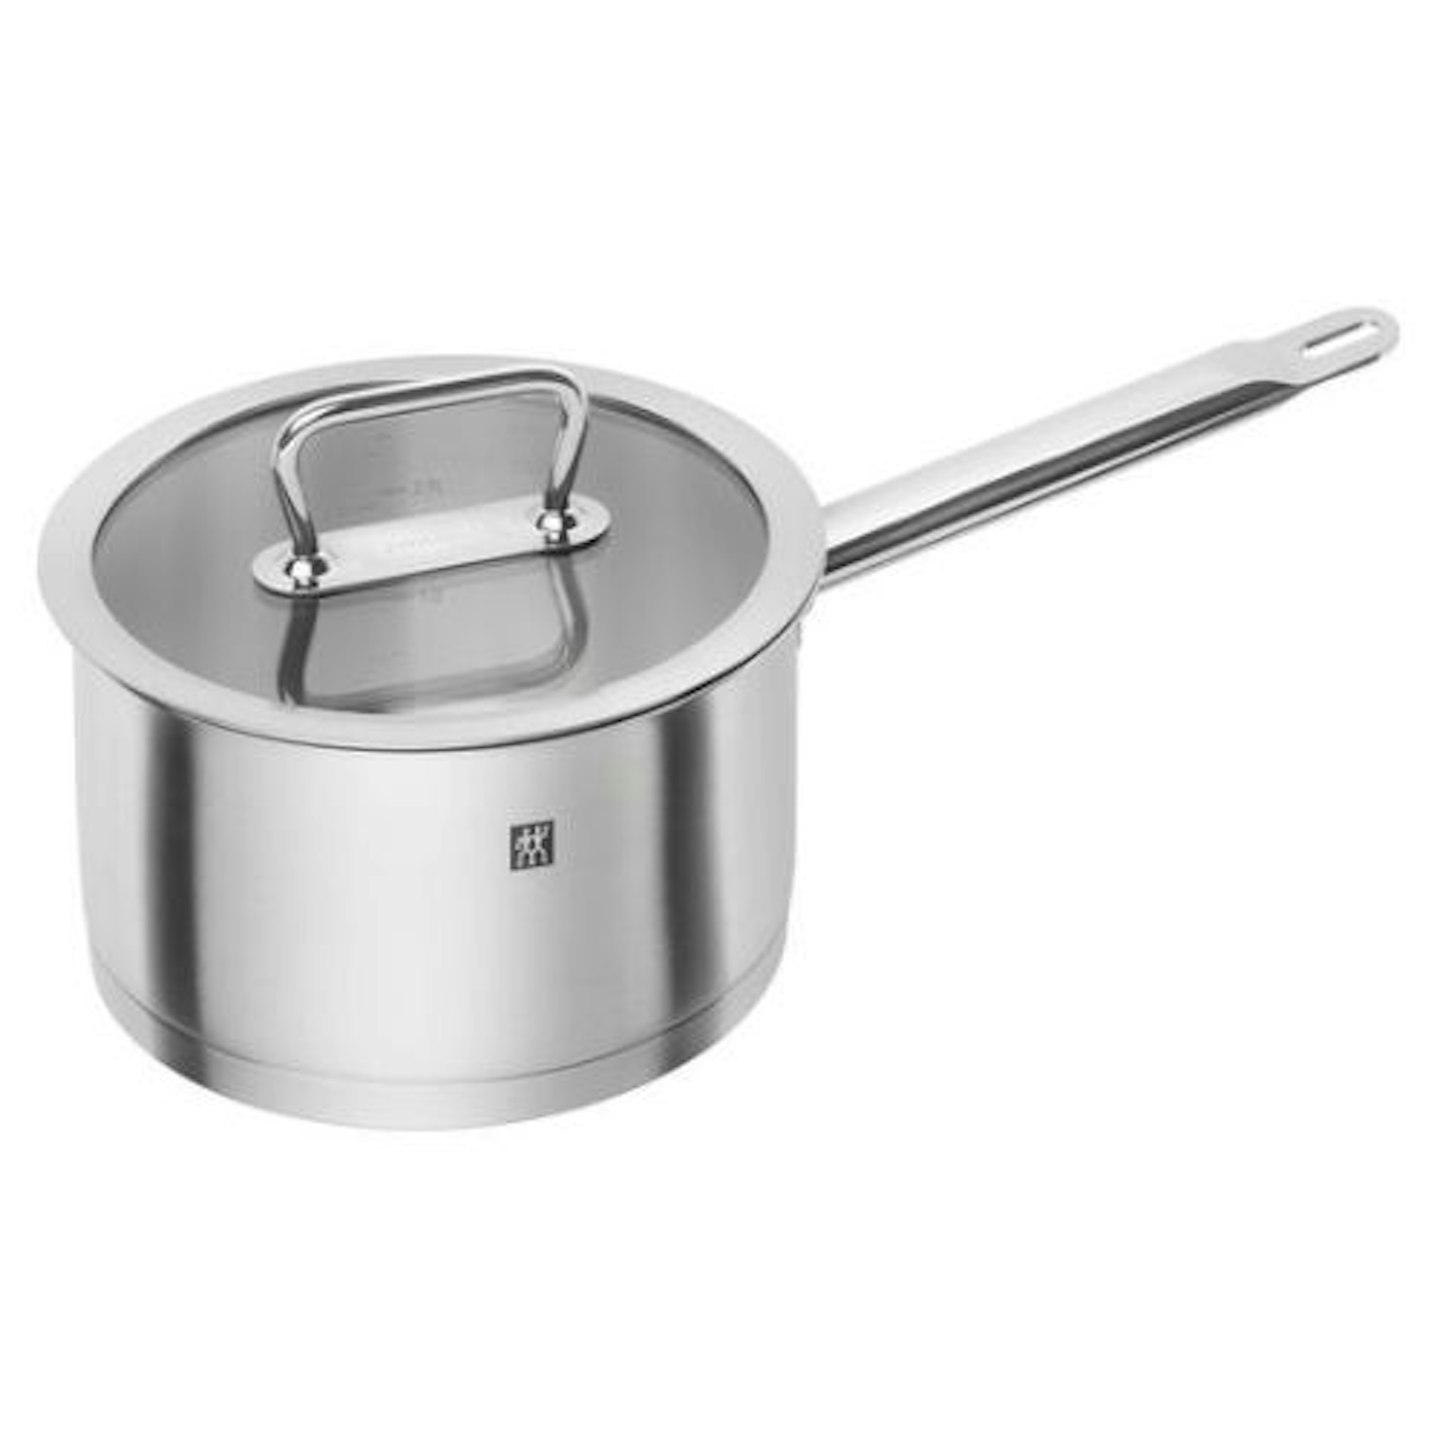 Zwilling Pro 1810 Stainless Steel Saucepan